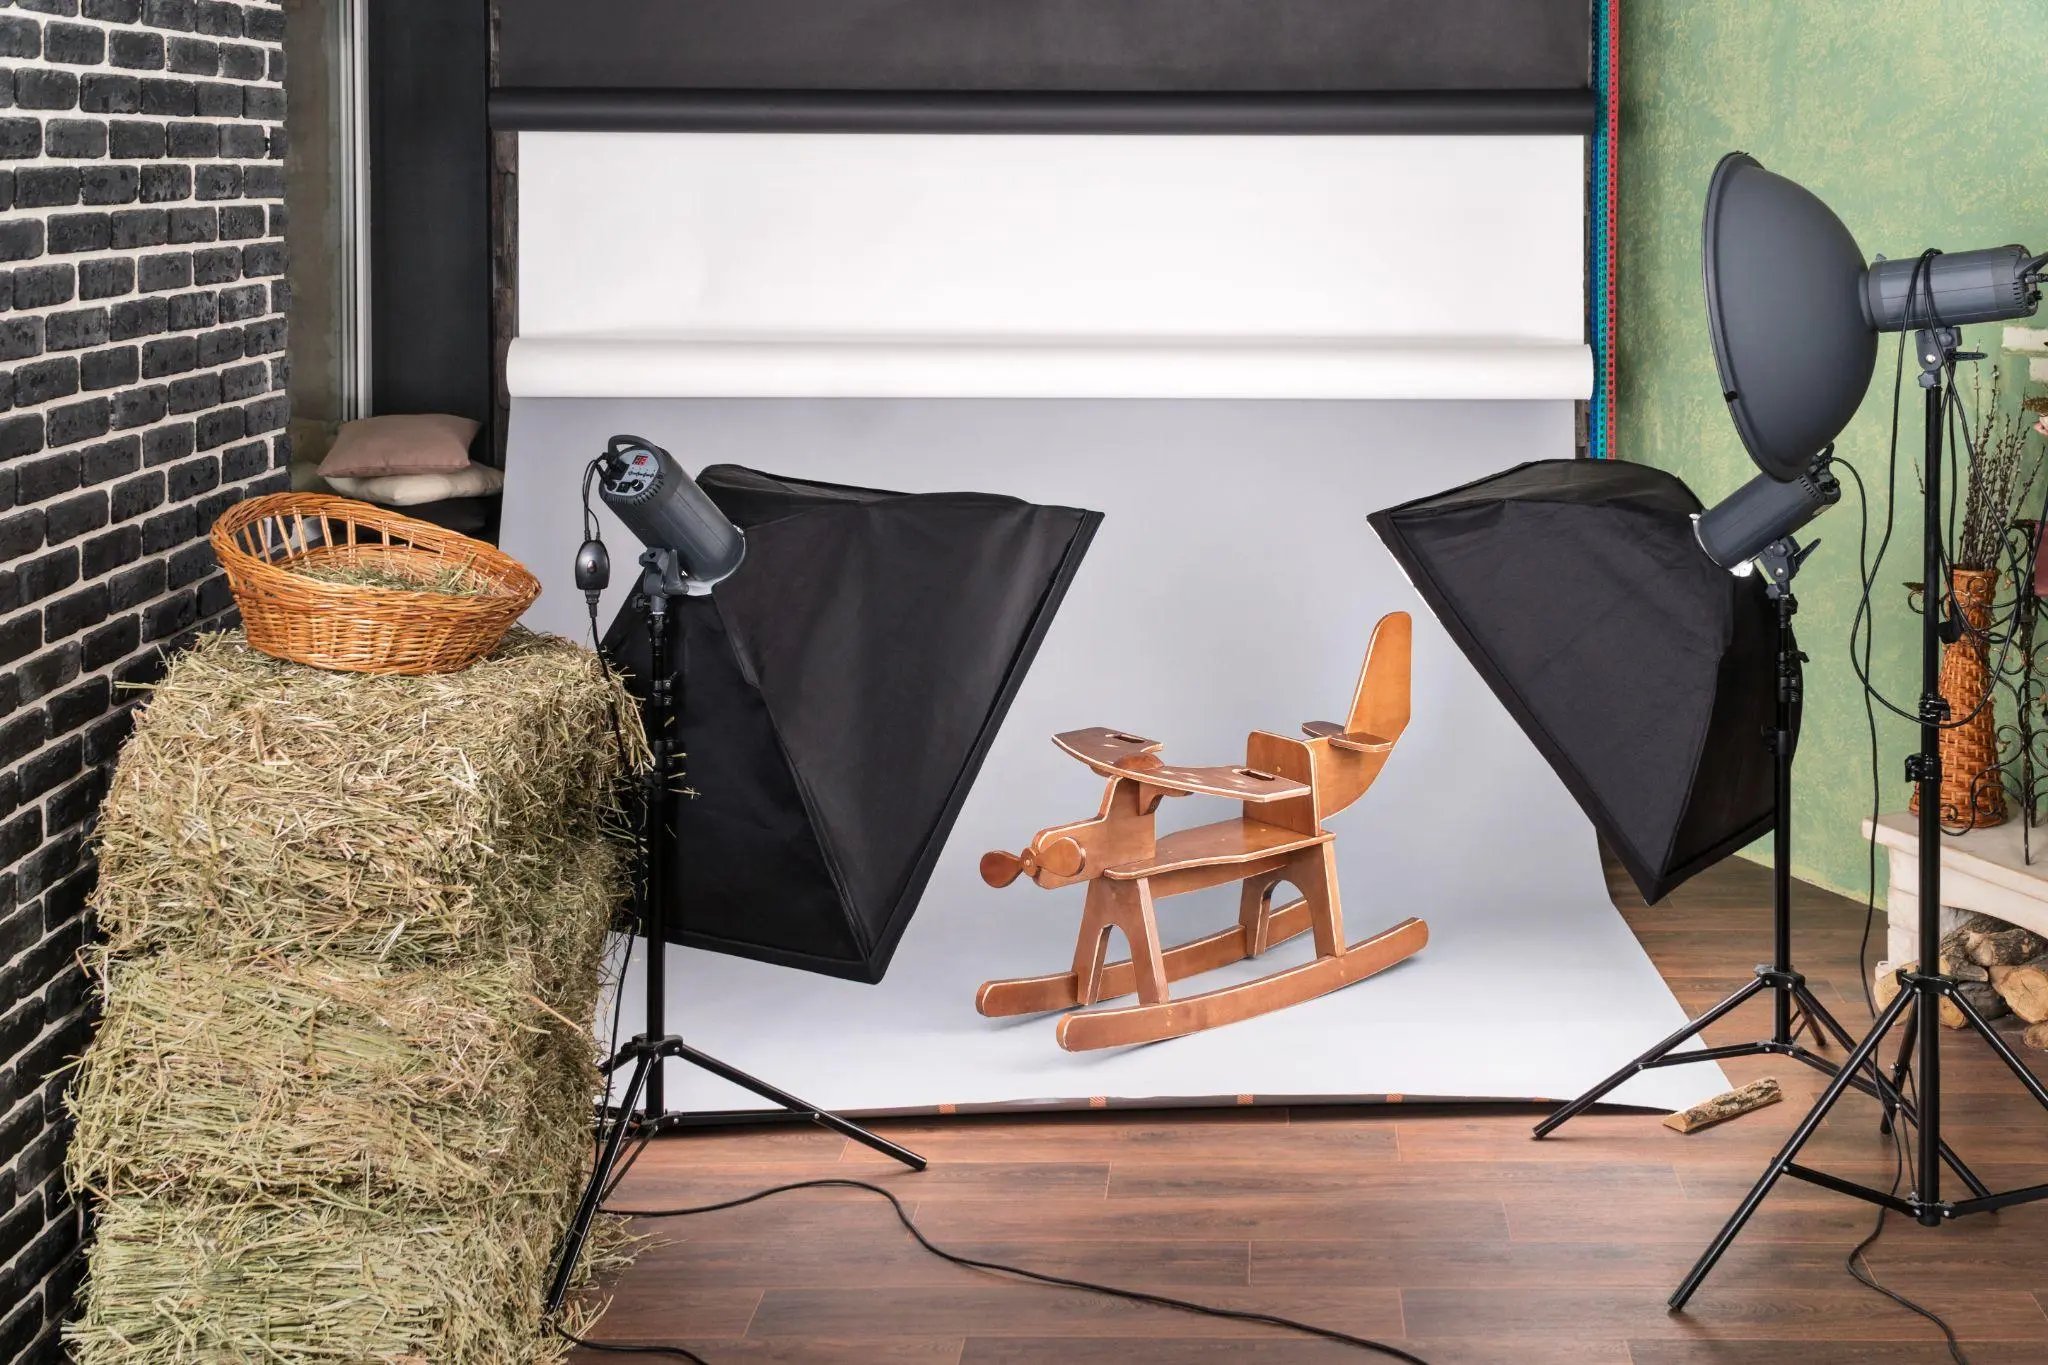 The process of studio photography of a child toy